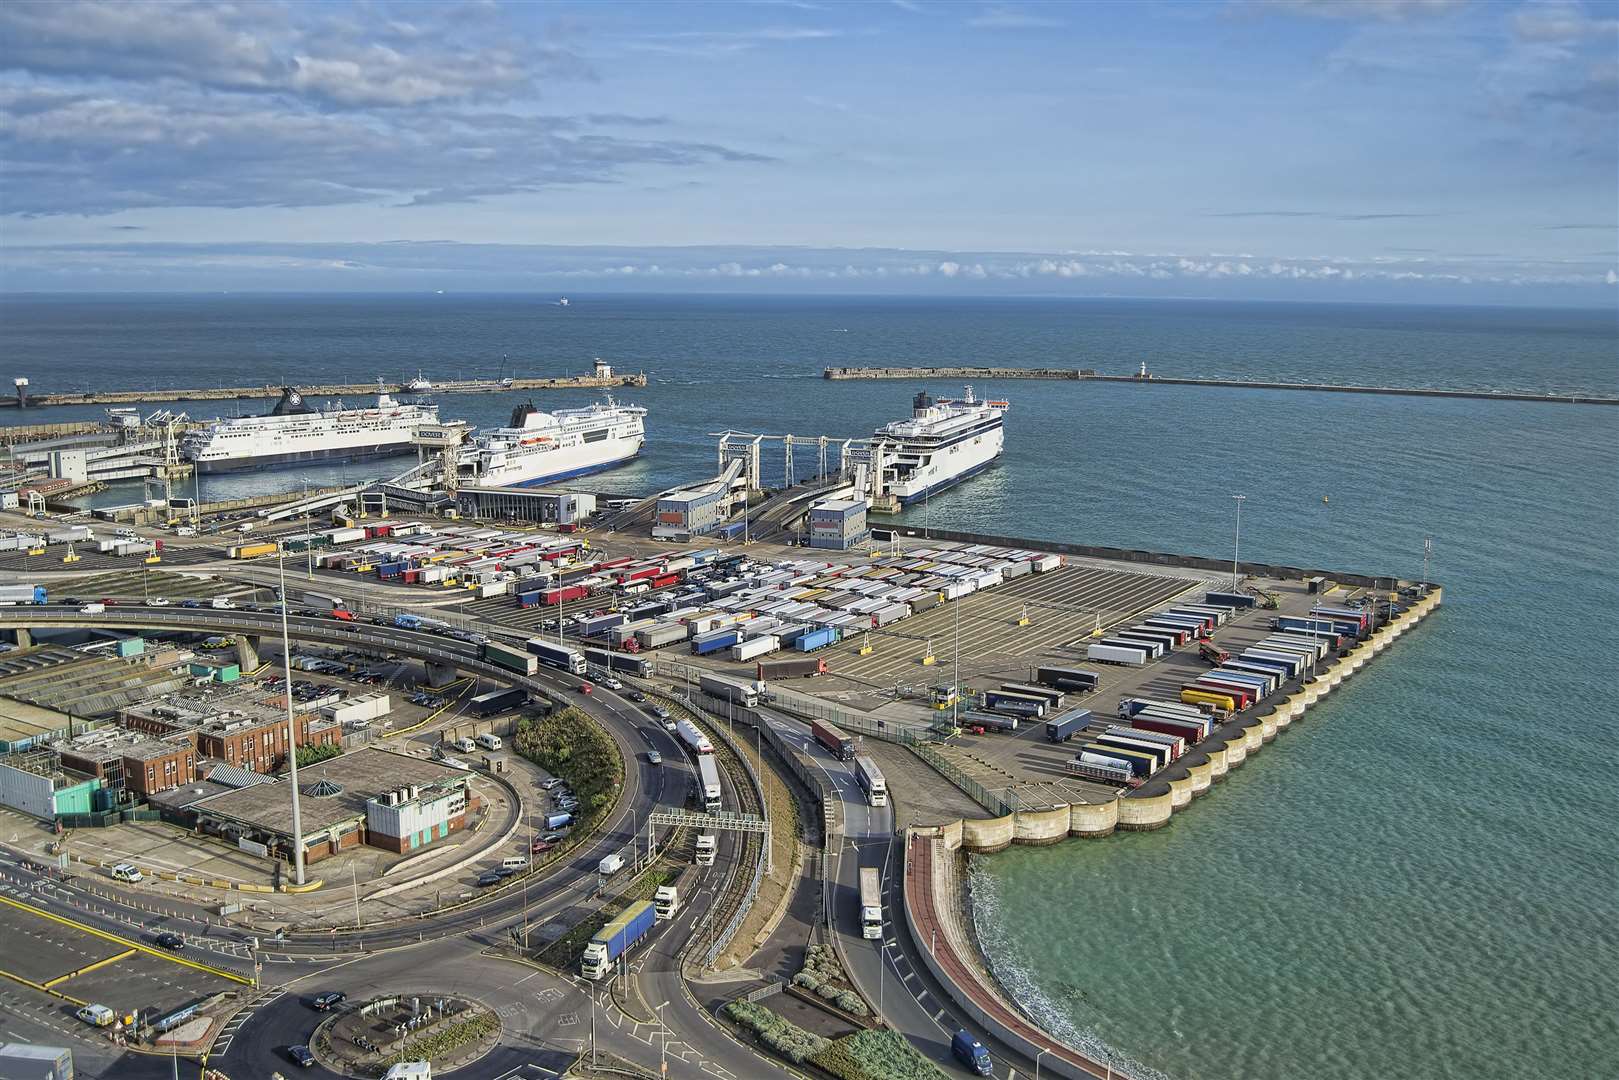 Quarantine measures will apply to the majority of travellers arriving in the UK at ports next month